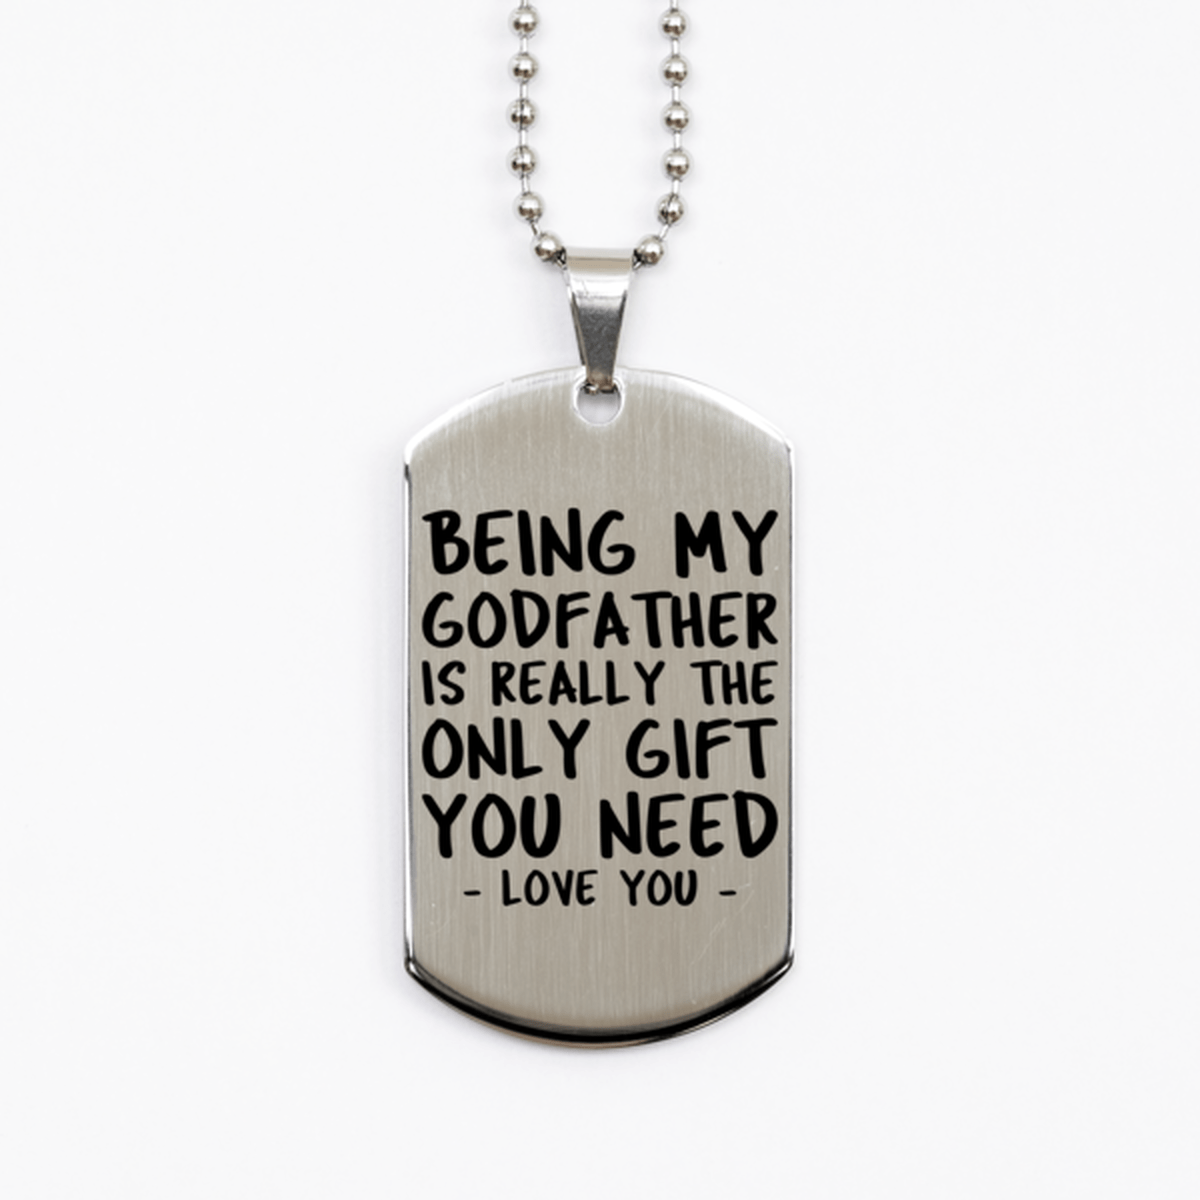 Funny Godfather Silver Dog Tag Necklace, Being My Godfather Is Really the Only Gift You Need, Best Birthday Gifts for Godfather